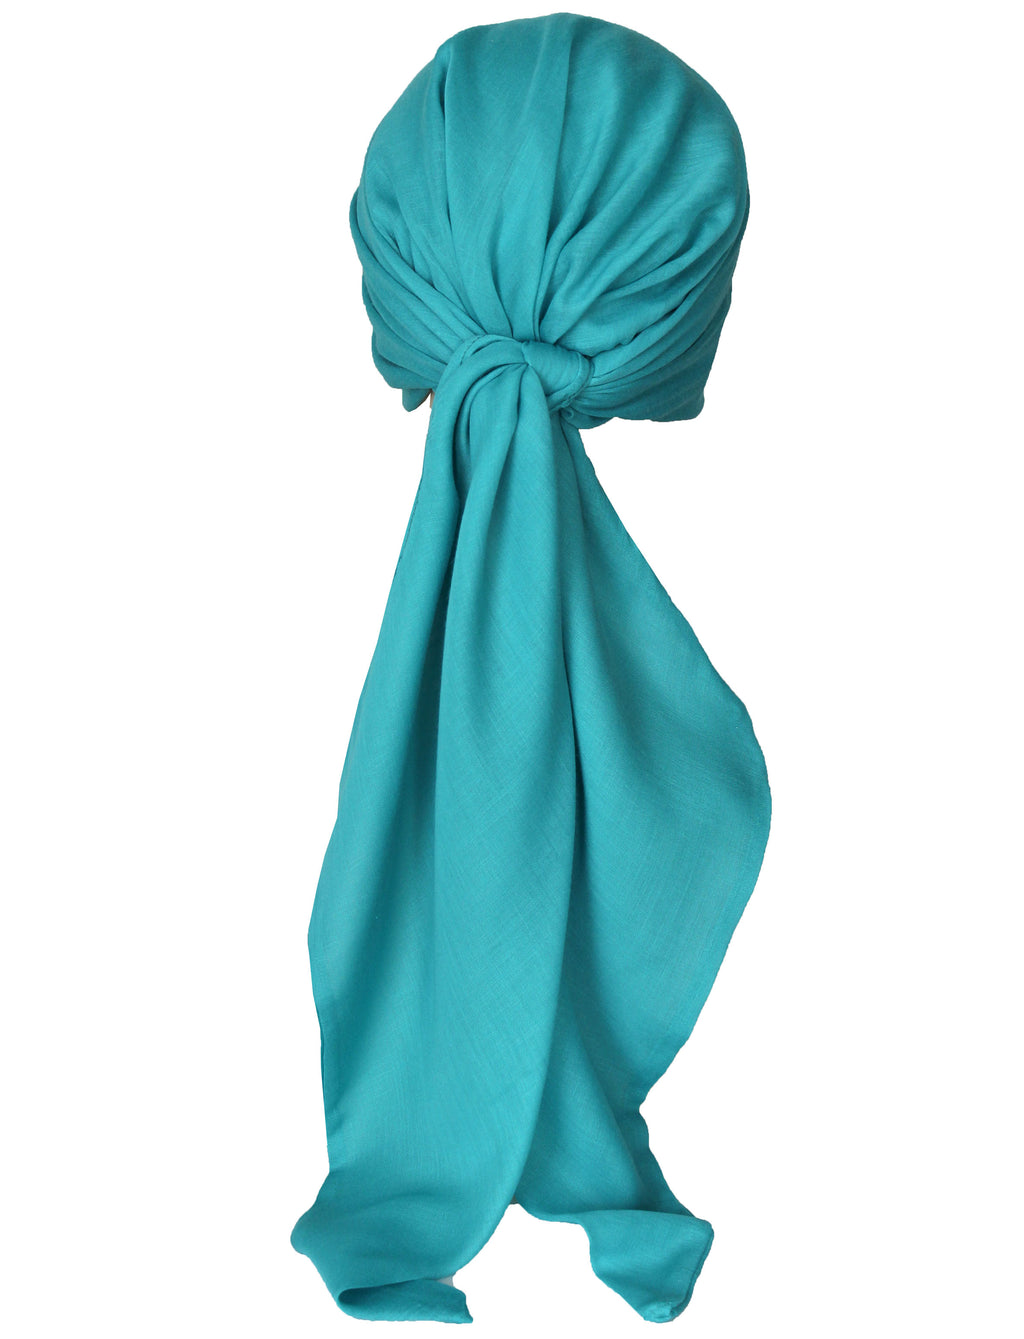 Deresina Orgnic Easy Tie Headscarf for Hair Loss